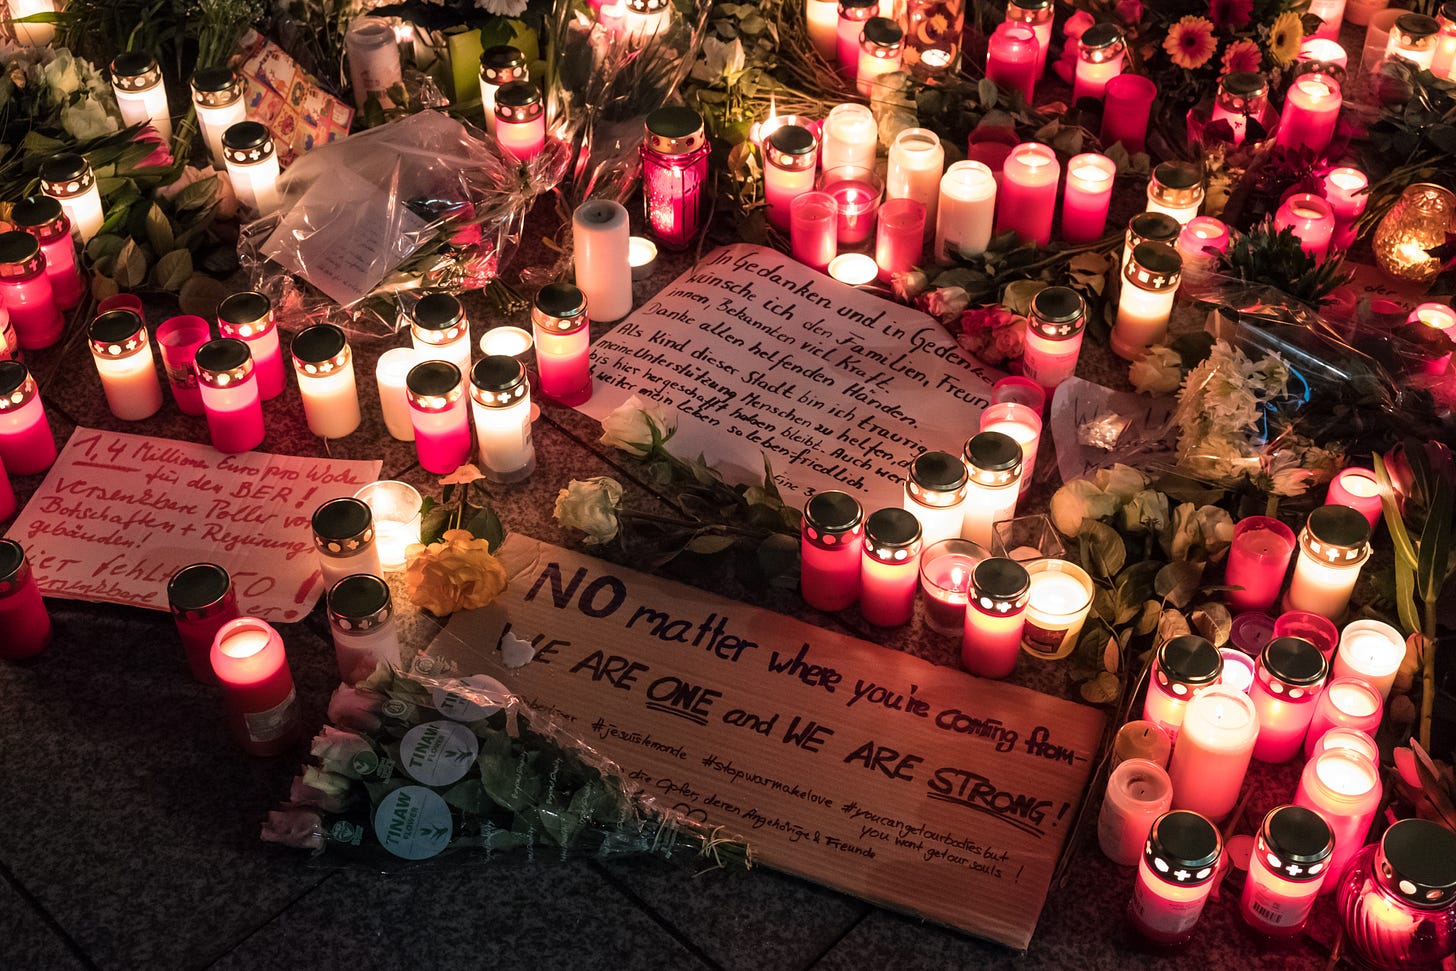 DECEMBER 21, 2016 - BERLIN: flowers and candles after the terror attack on the christmas holiday market a day before, Breitscheidplatz © hanohiki / shutterstock